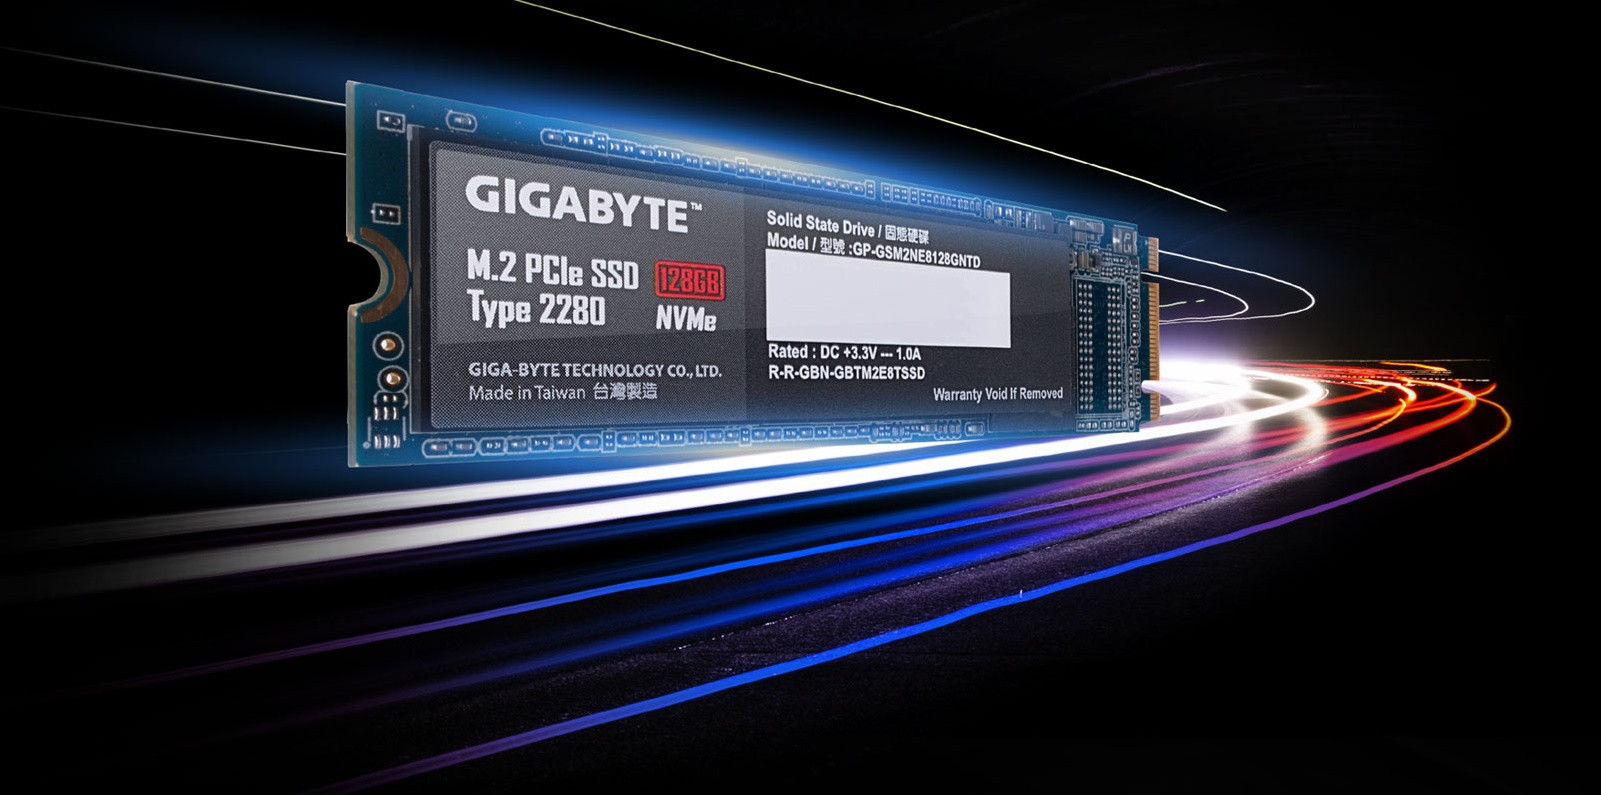 Gigabyte SSD Storage Lineup NVMe M.2 Solutions | TechPowerUp